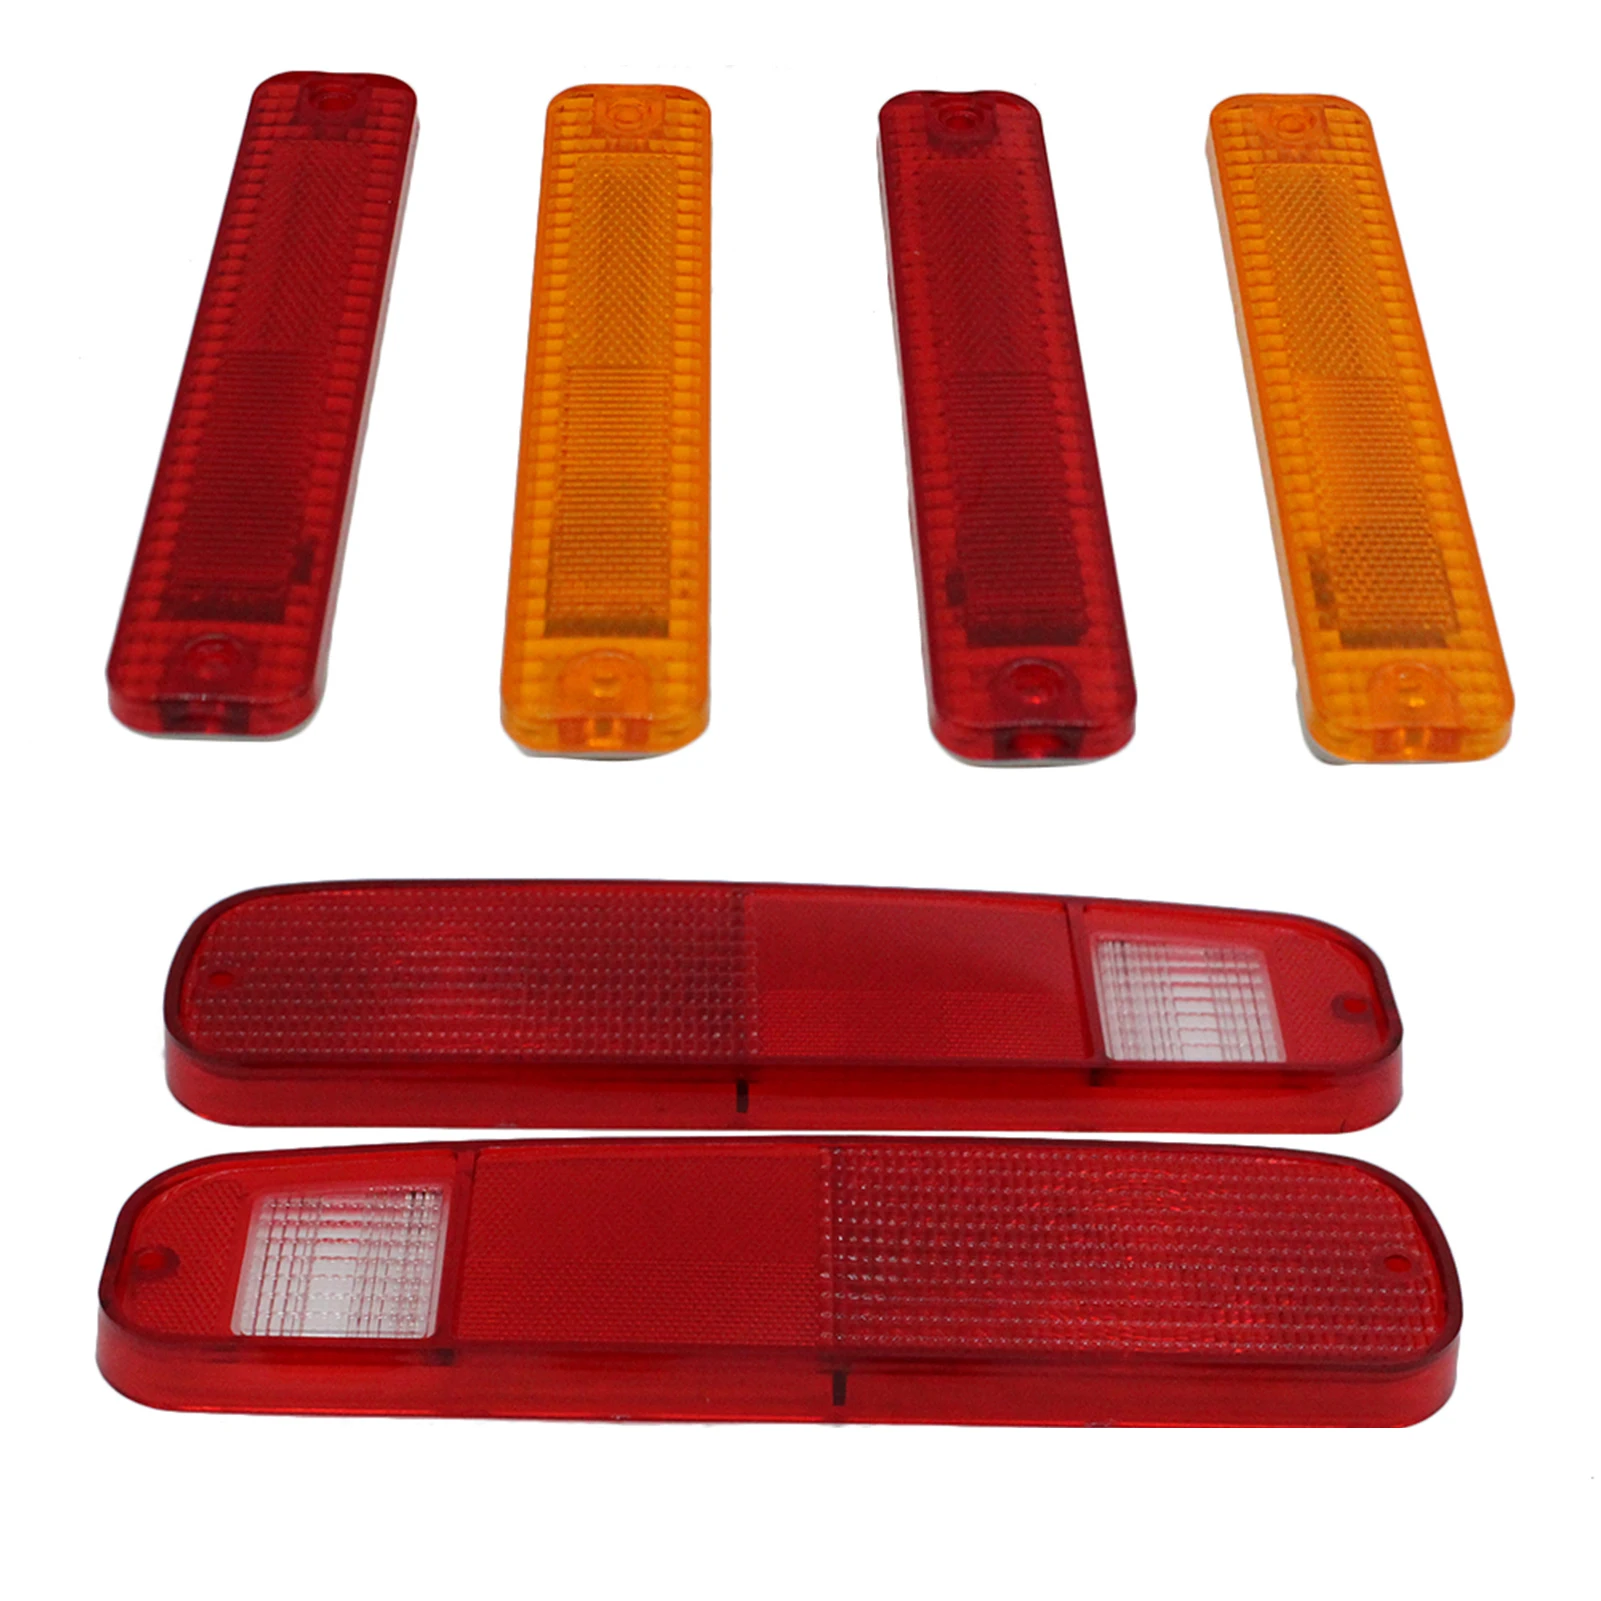 

6pcs Tail Light Housing And Side Fender Kit Fit High Quality Brightness For Ford F150 F250 Truck 78-79 Bronco Car Accessories